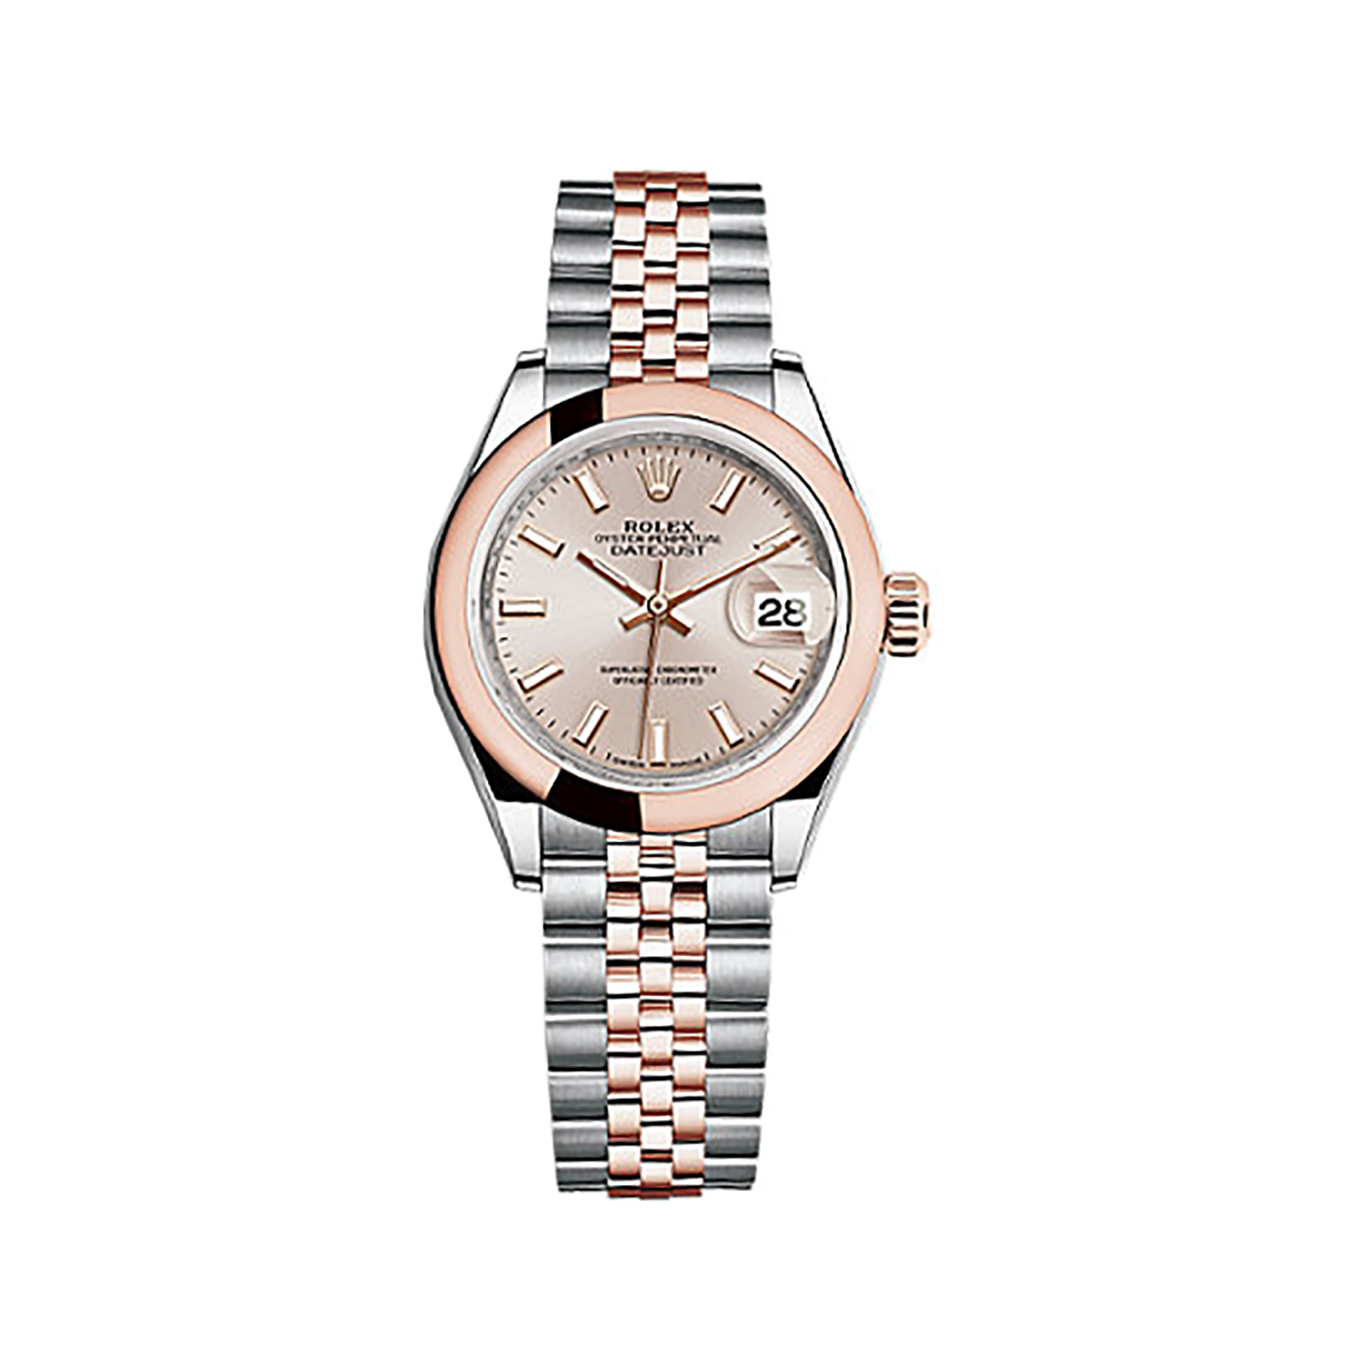 Lady-Datejust 28 279161 Rose Gold & Stainless Steel Watch (Sundust)